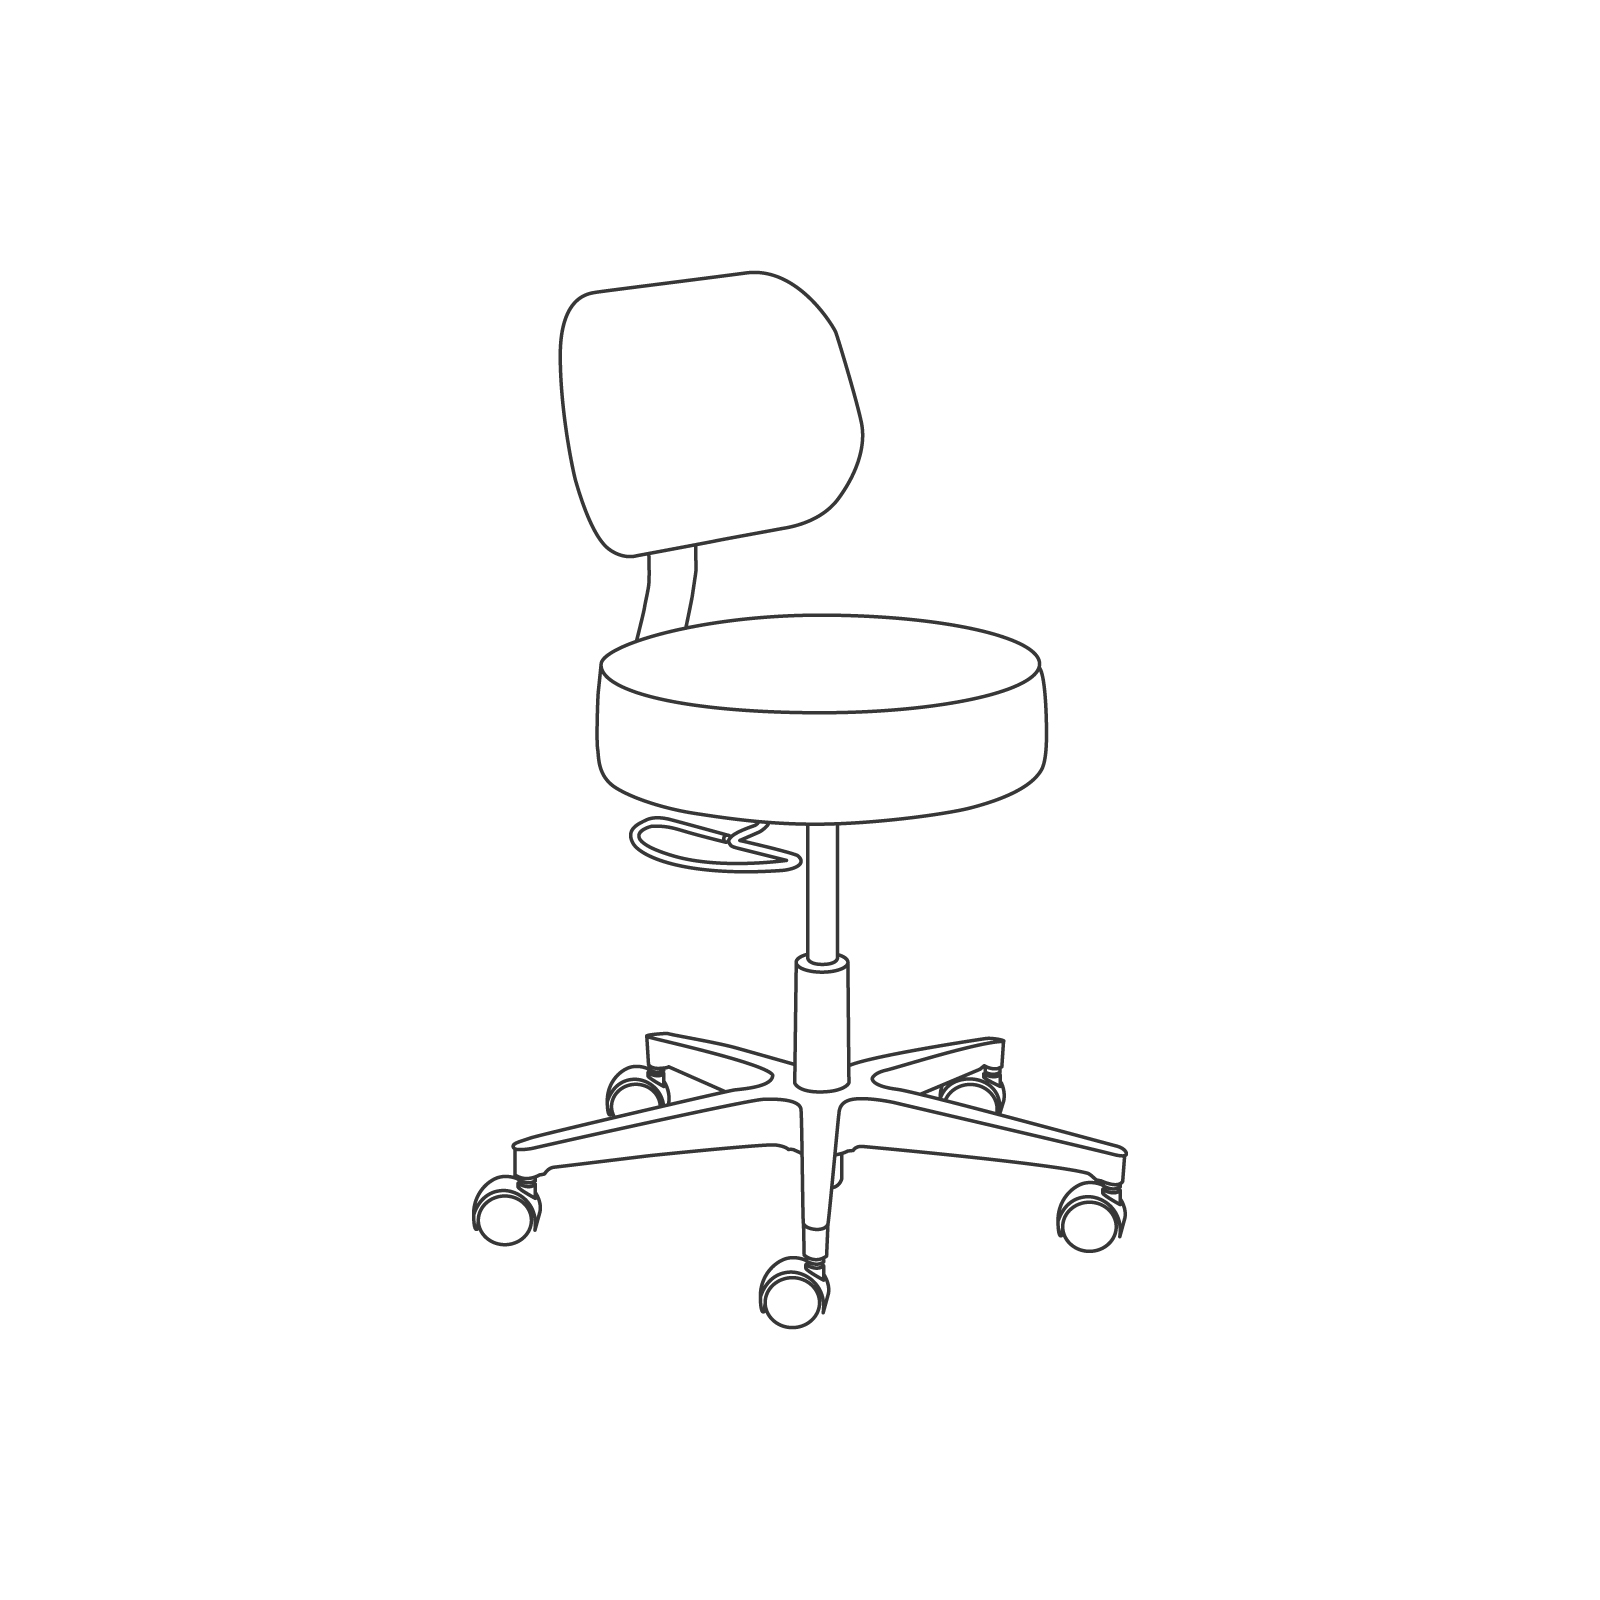 A line drawing - Lab Stool–D-Ring Adjustment